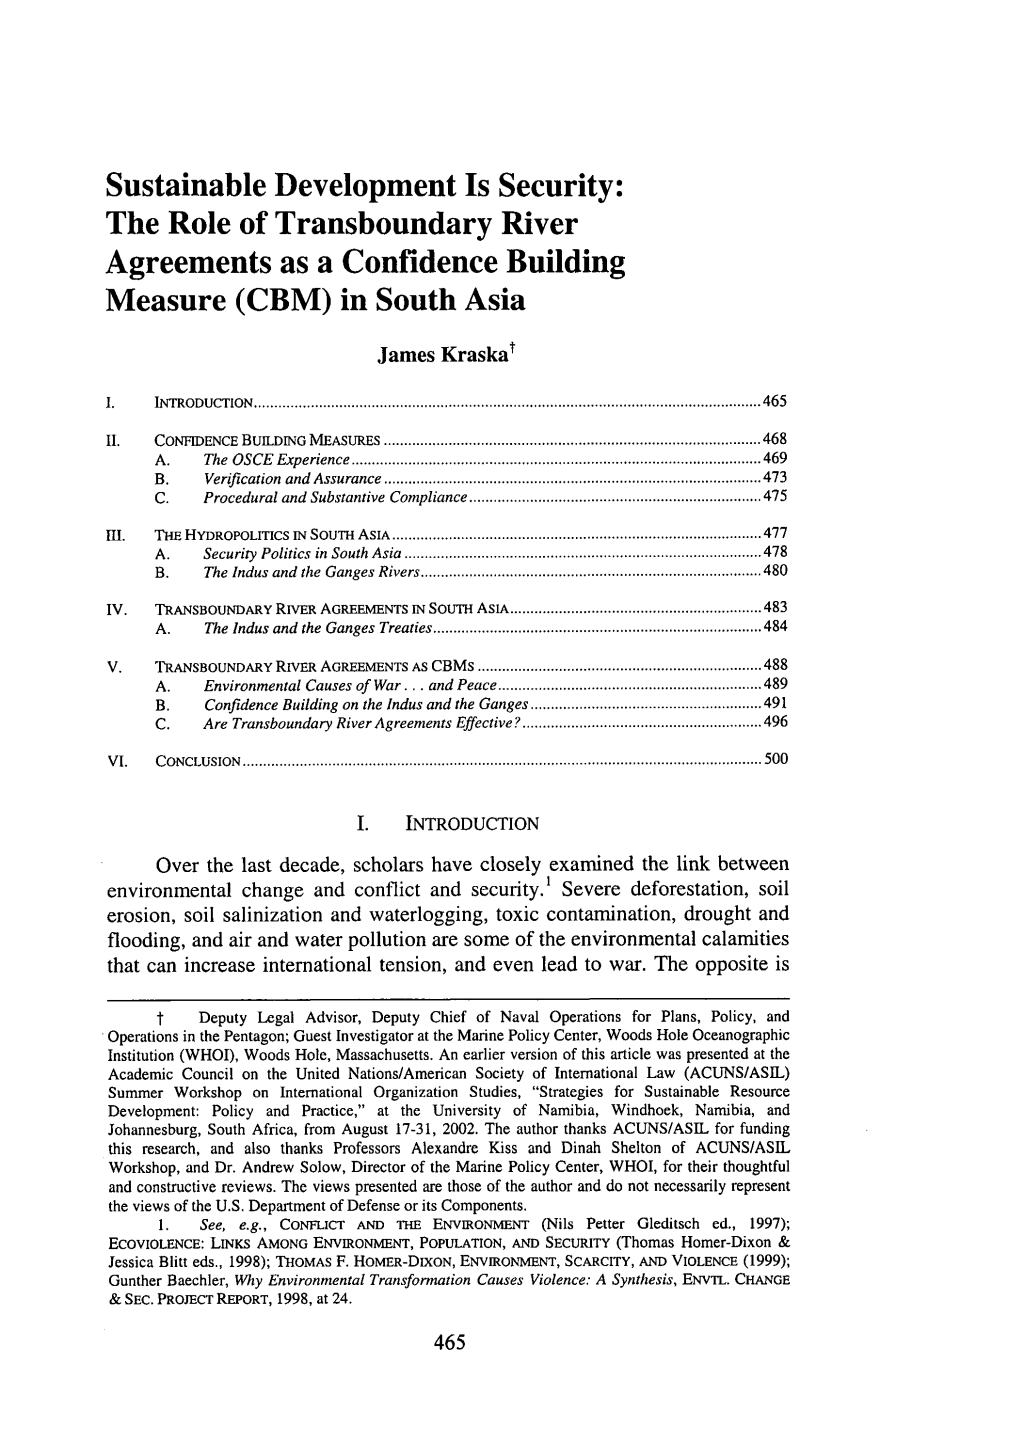 The Role of Transboundary River Agreements As a Confidence Building Measure (CBM) in South Asia